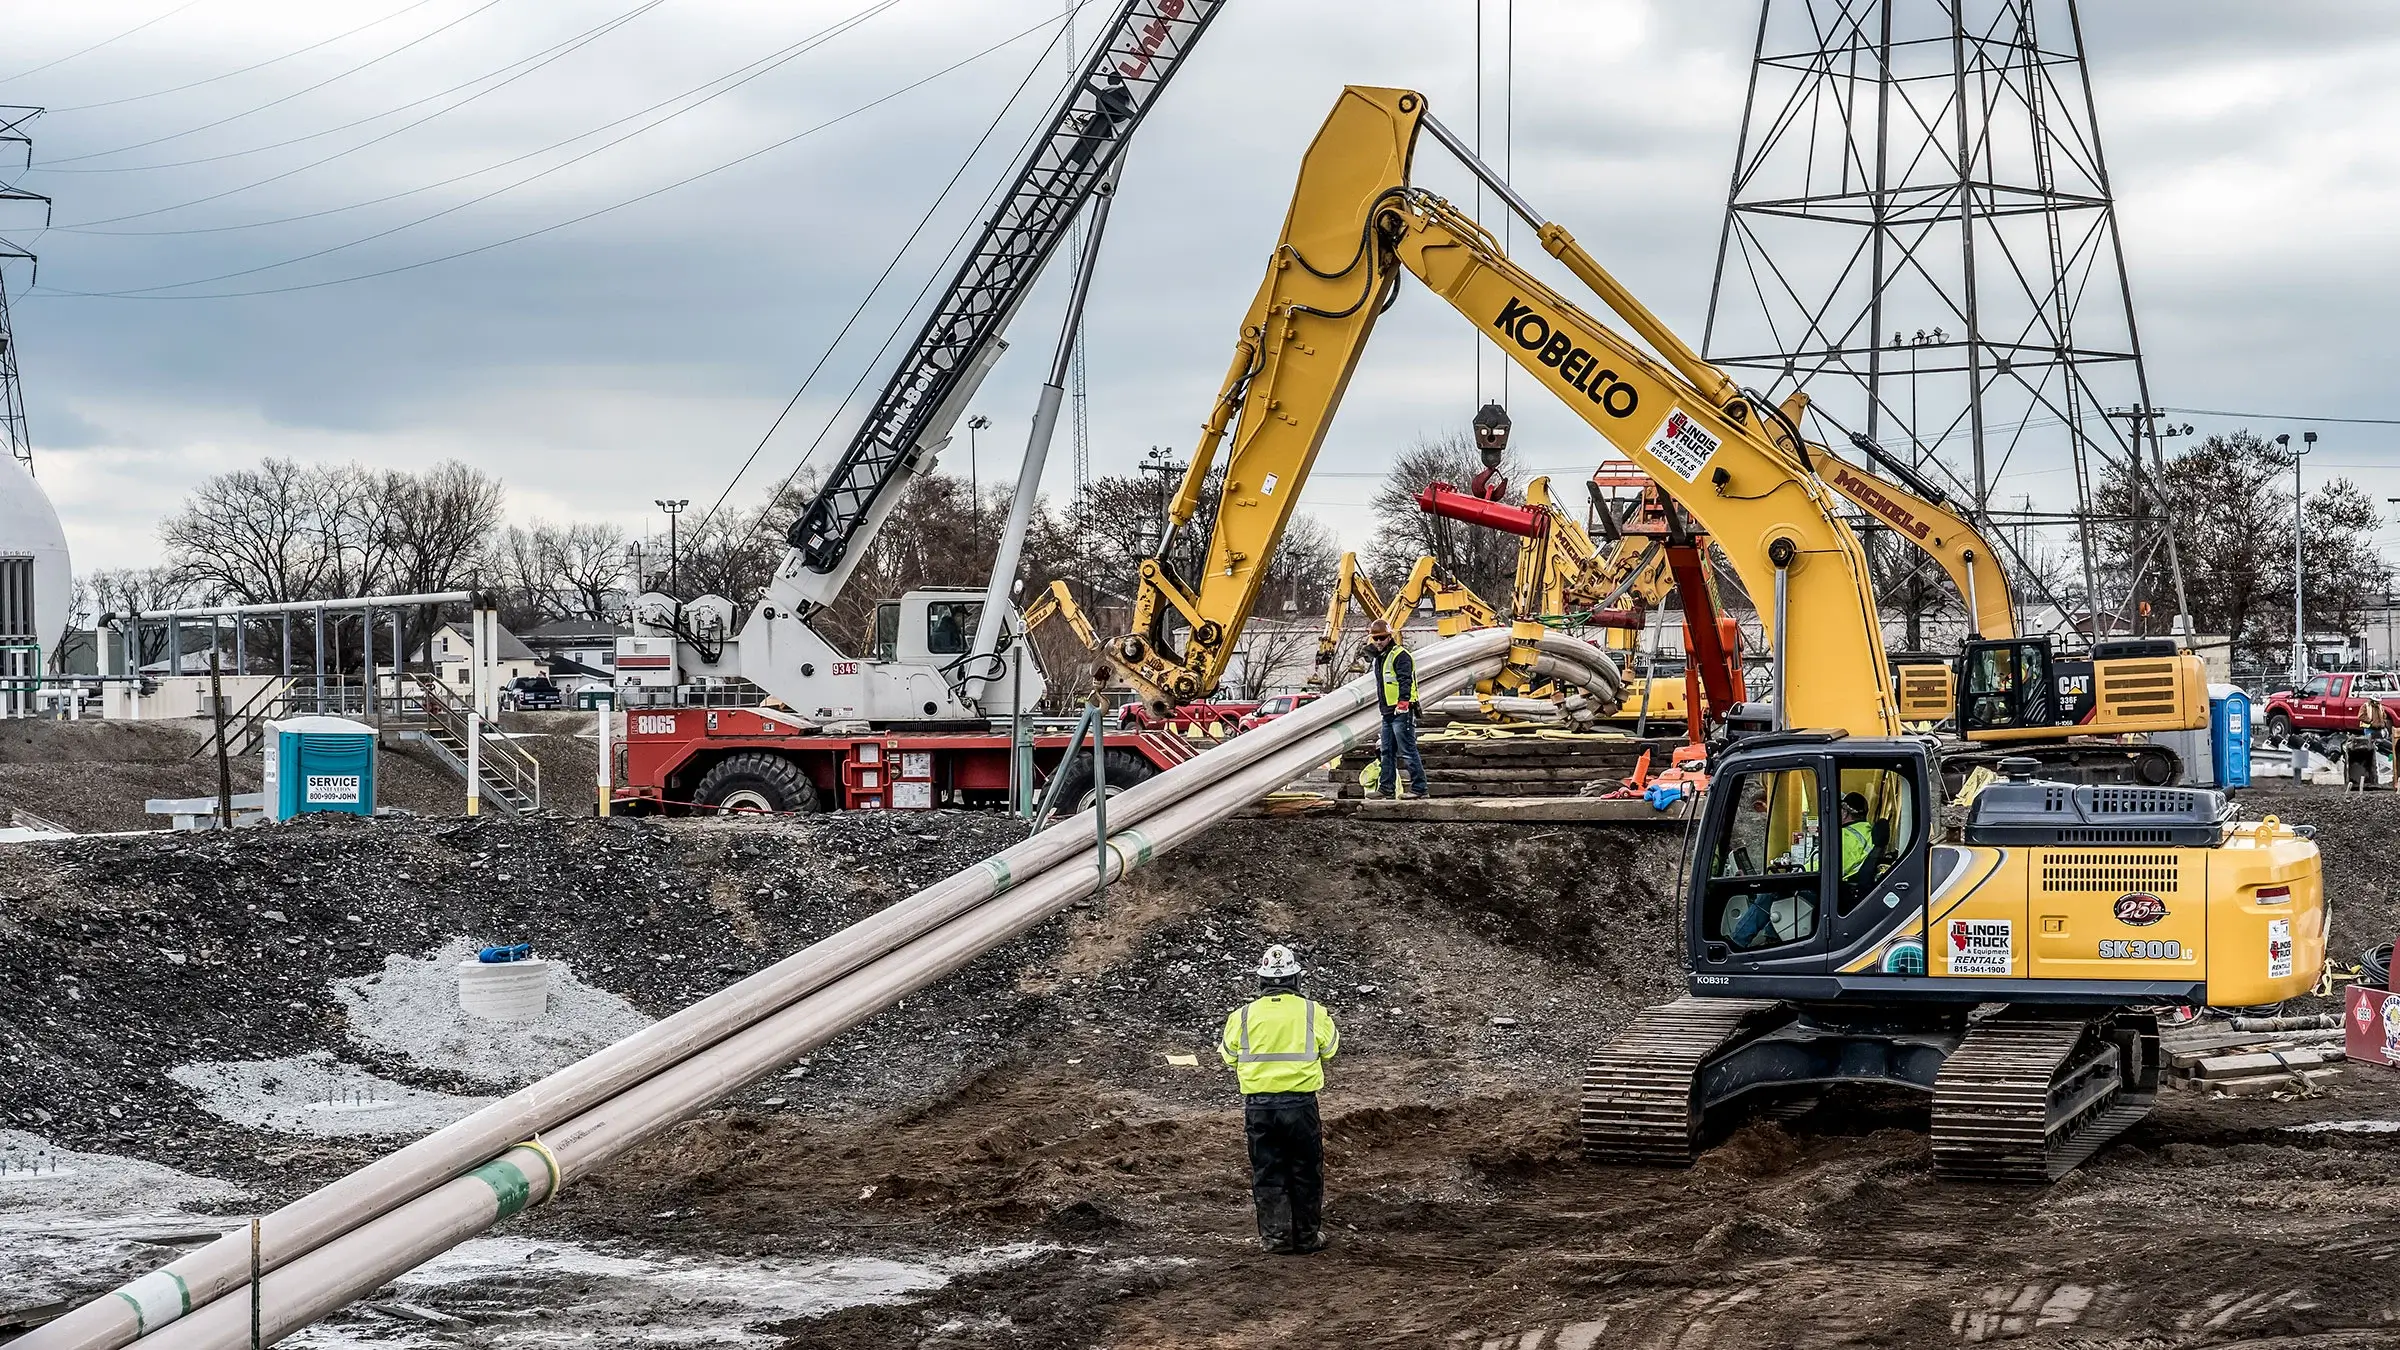 A bundle of pipes being lifted by multiple excavators and a crane